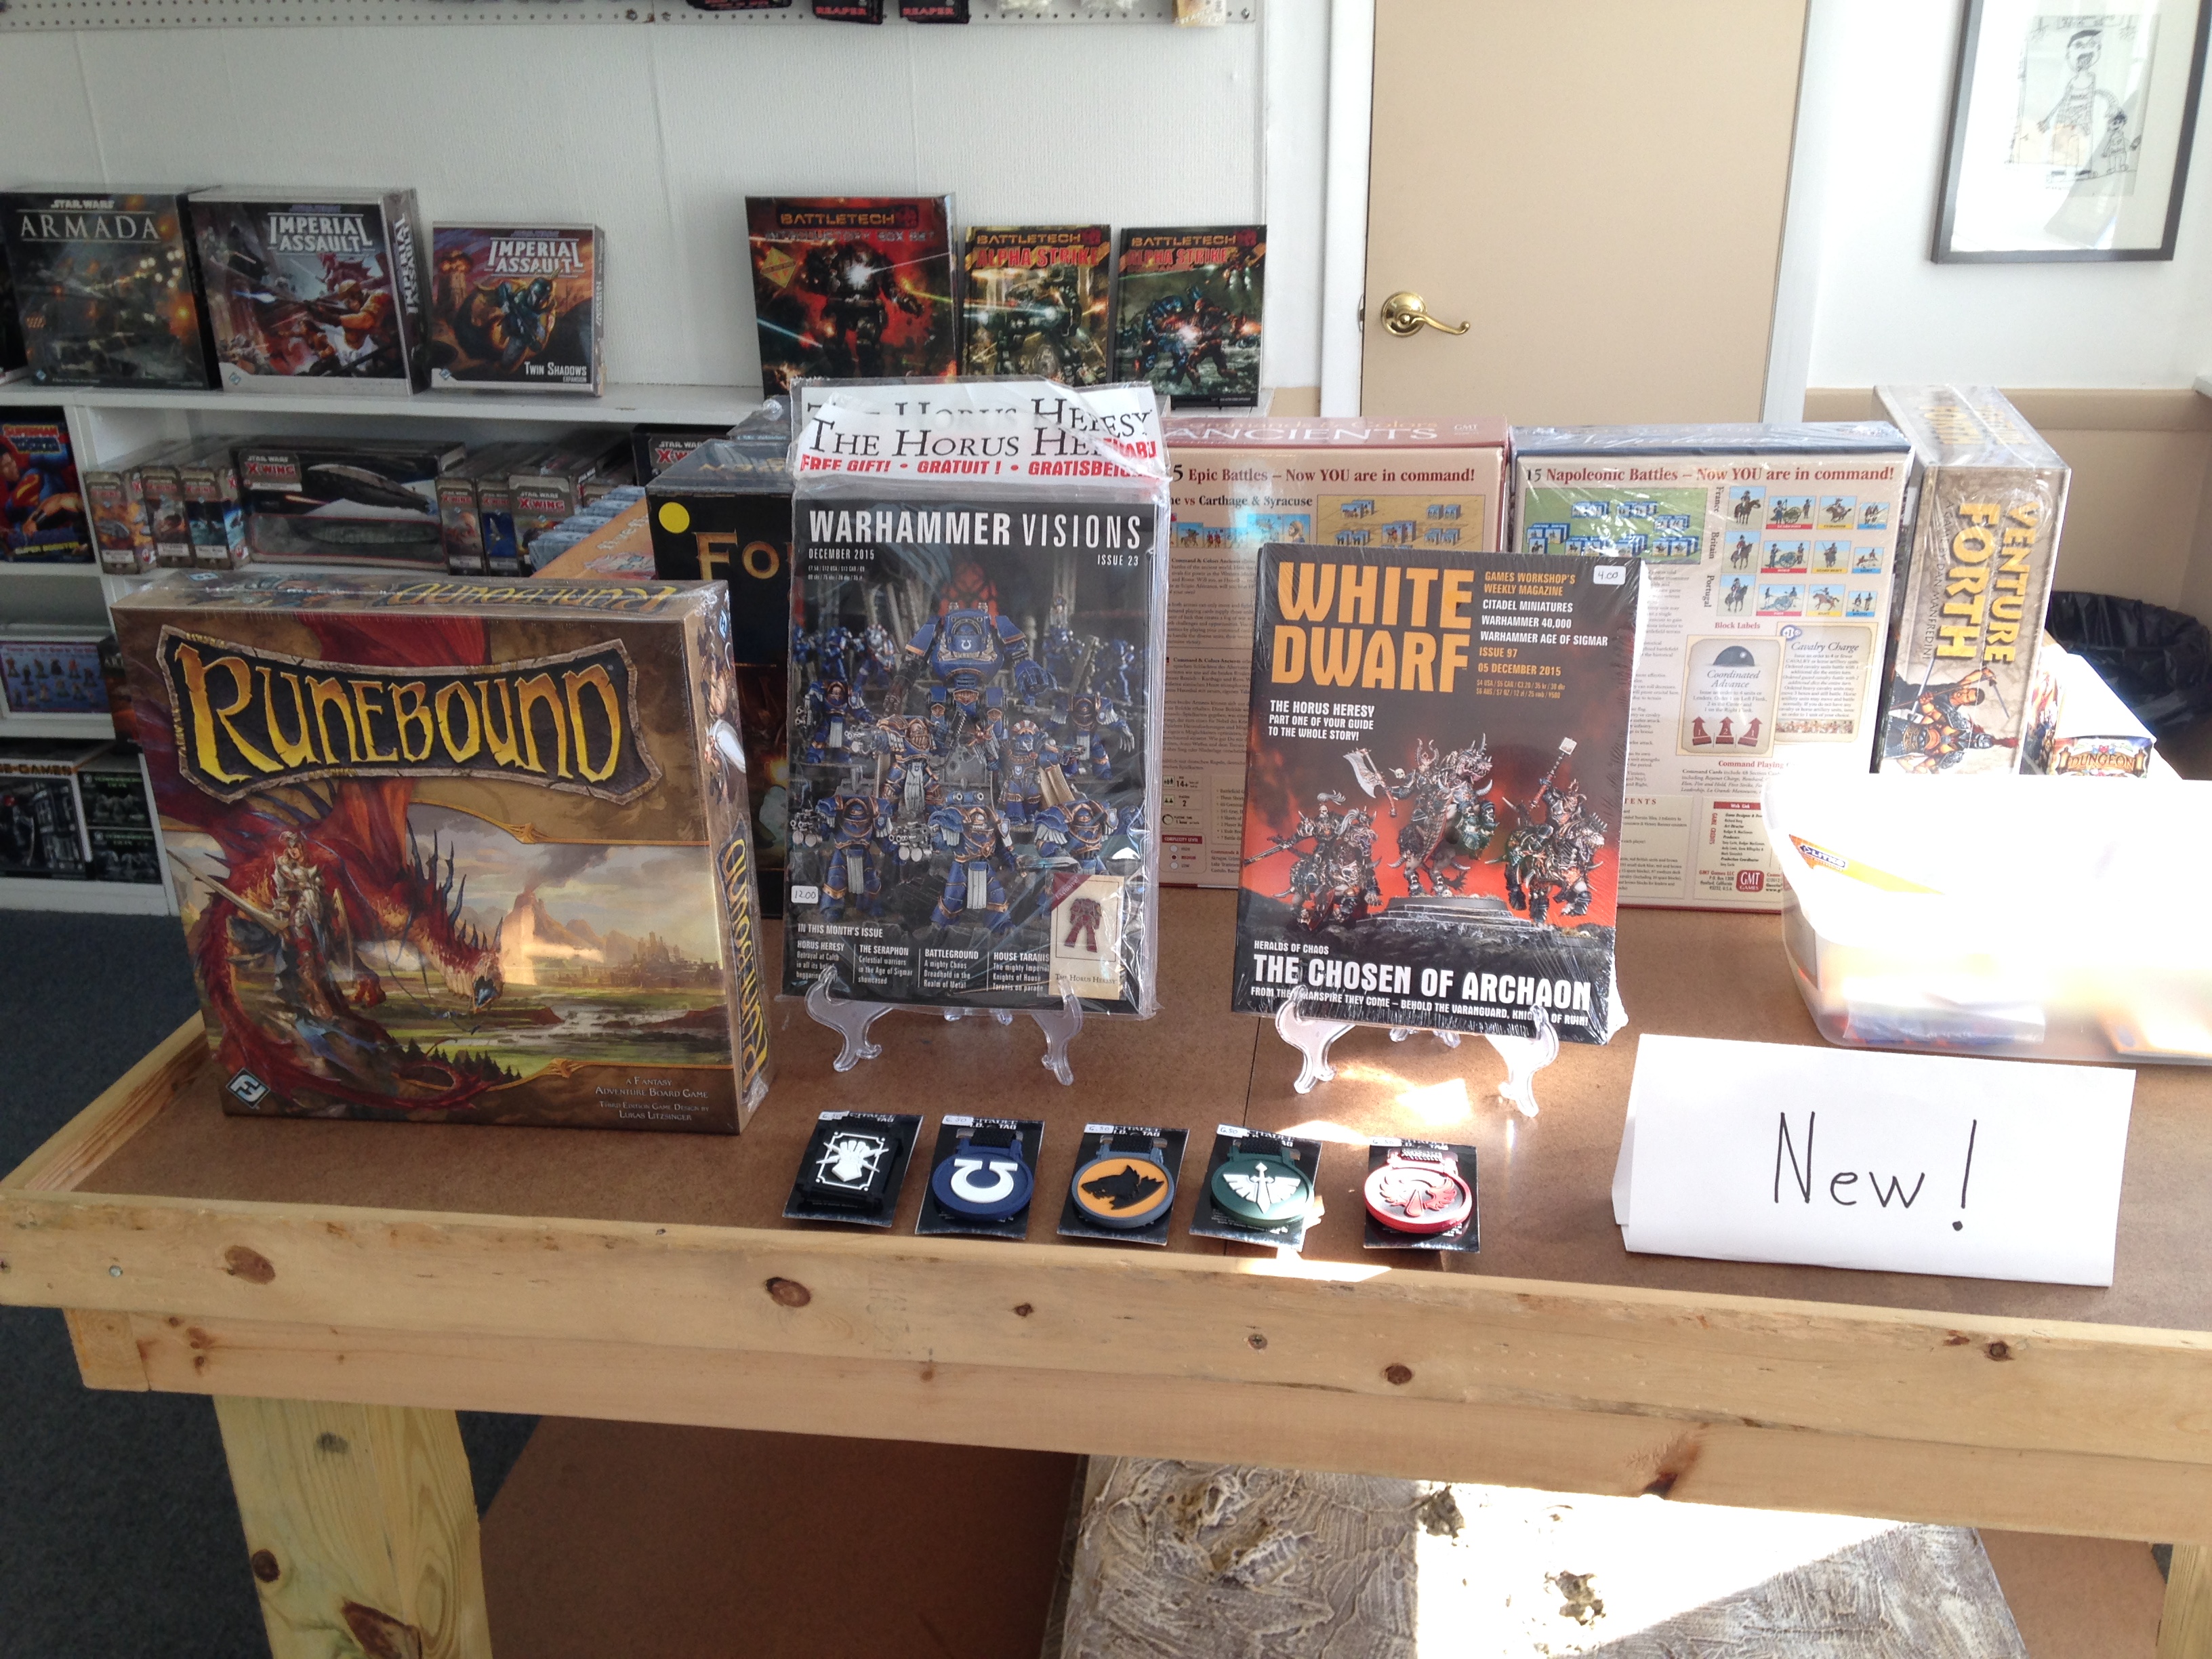 New in the Store 12/5/15 GW I.D. Tags, Warhammer Visions #23, White Dwarf #97, and Runebound 3rd Edition